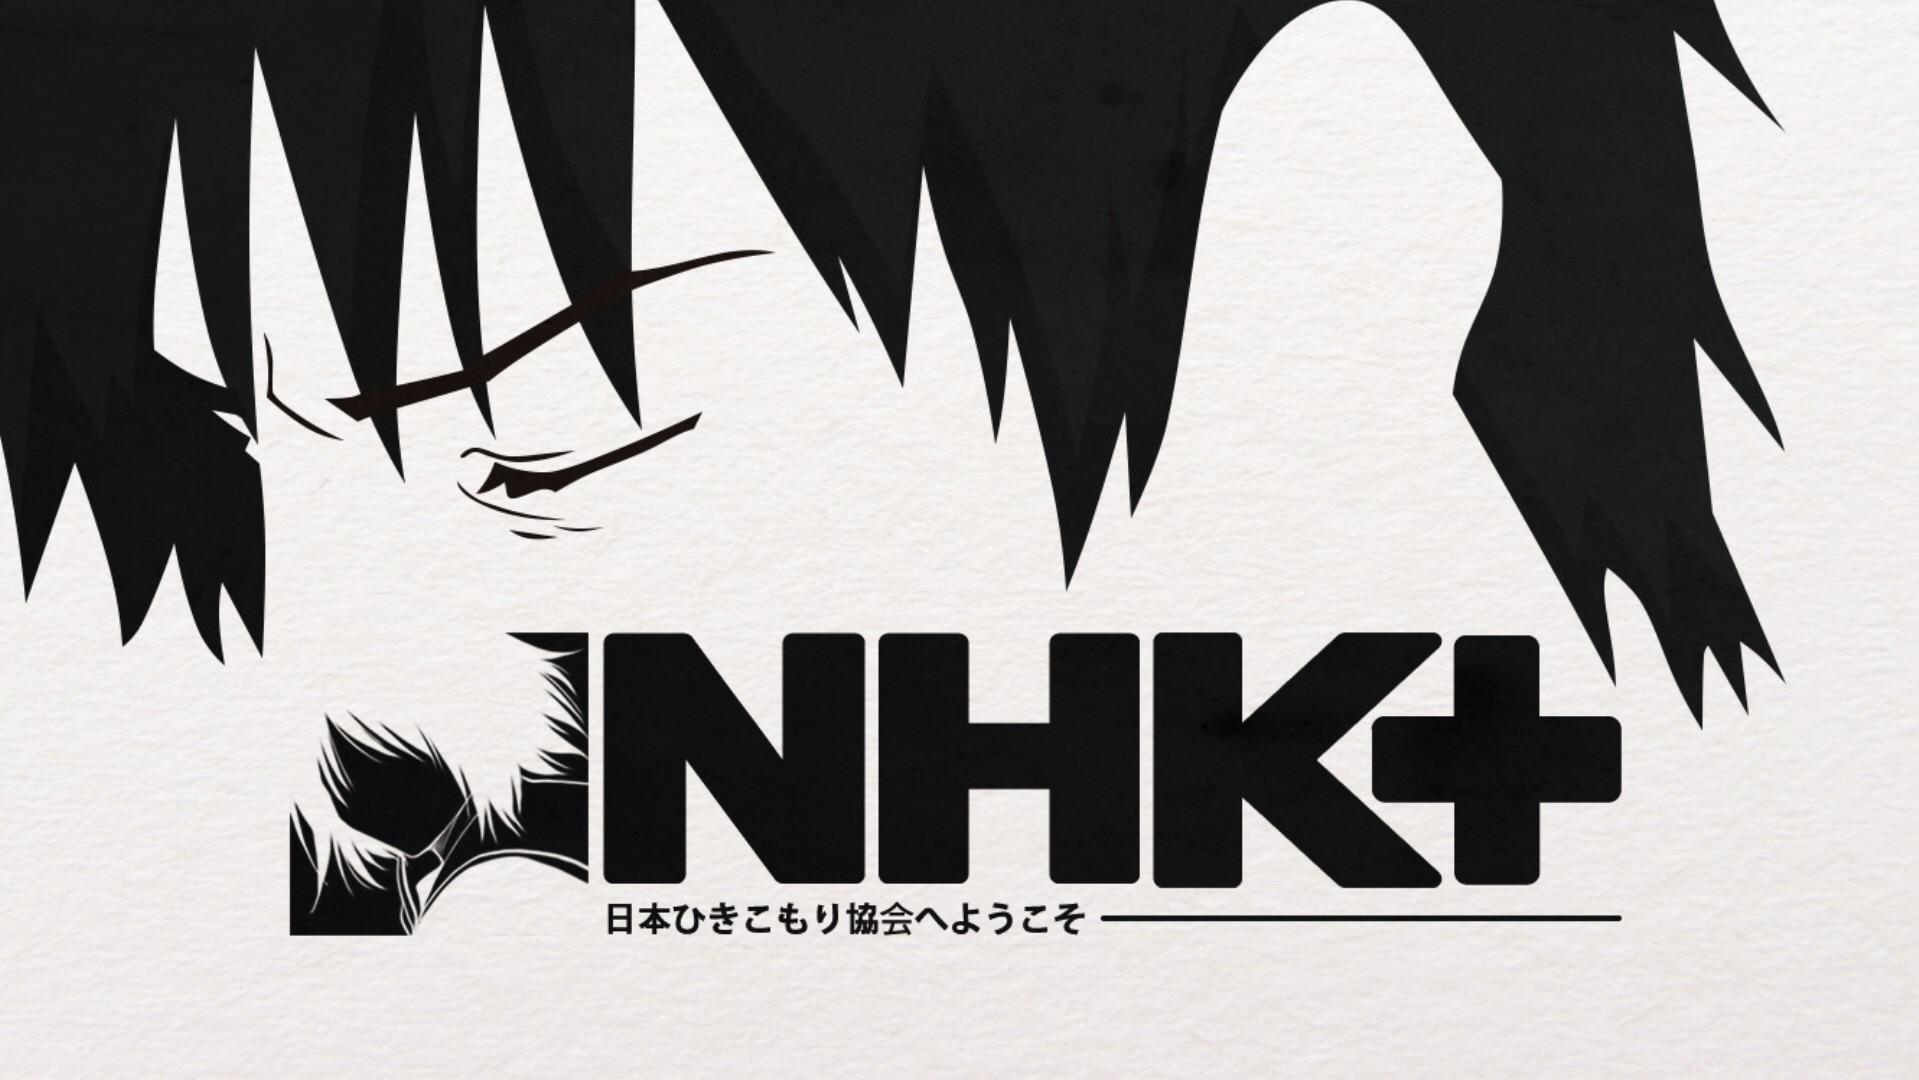 A Welcome to the NHK wallpaper. It isn't mine, but I don't remember where I found it either. Wish I could give credit though